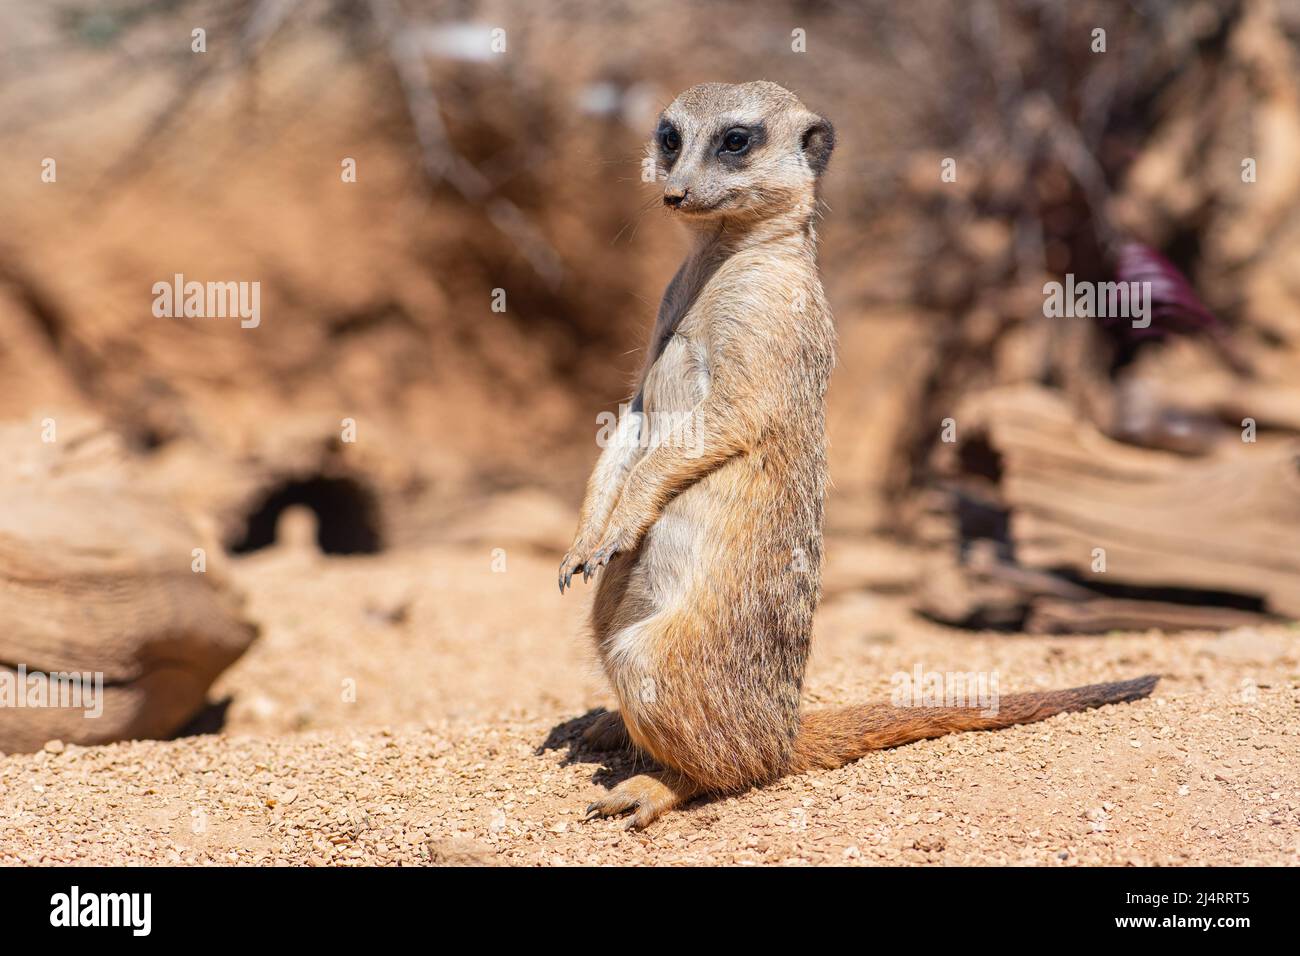 Meerkat, suricata suricatta or suricate, small mongoose found in southern Africa in natural habitat sitting close to openings of a warren, close up Stock Photo